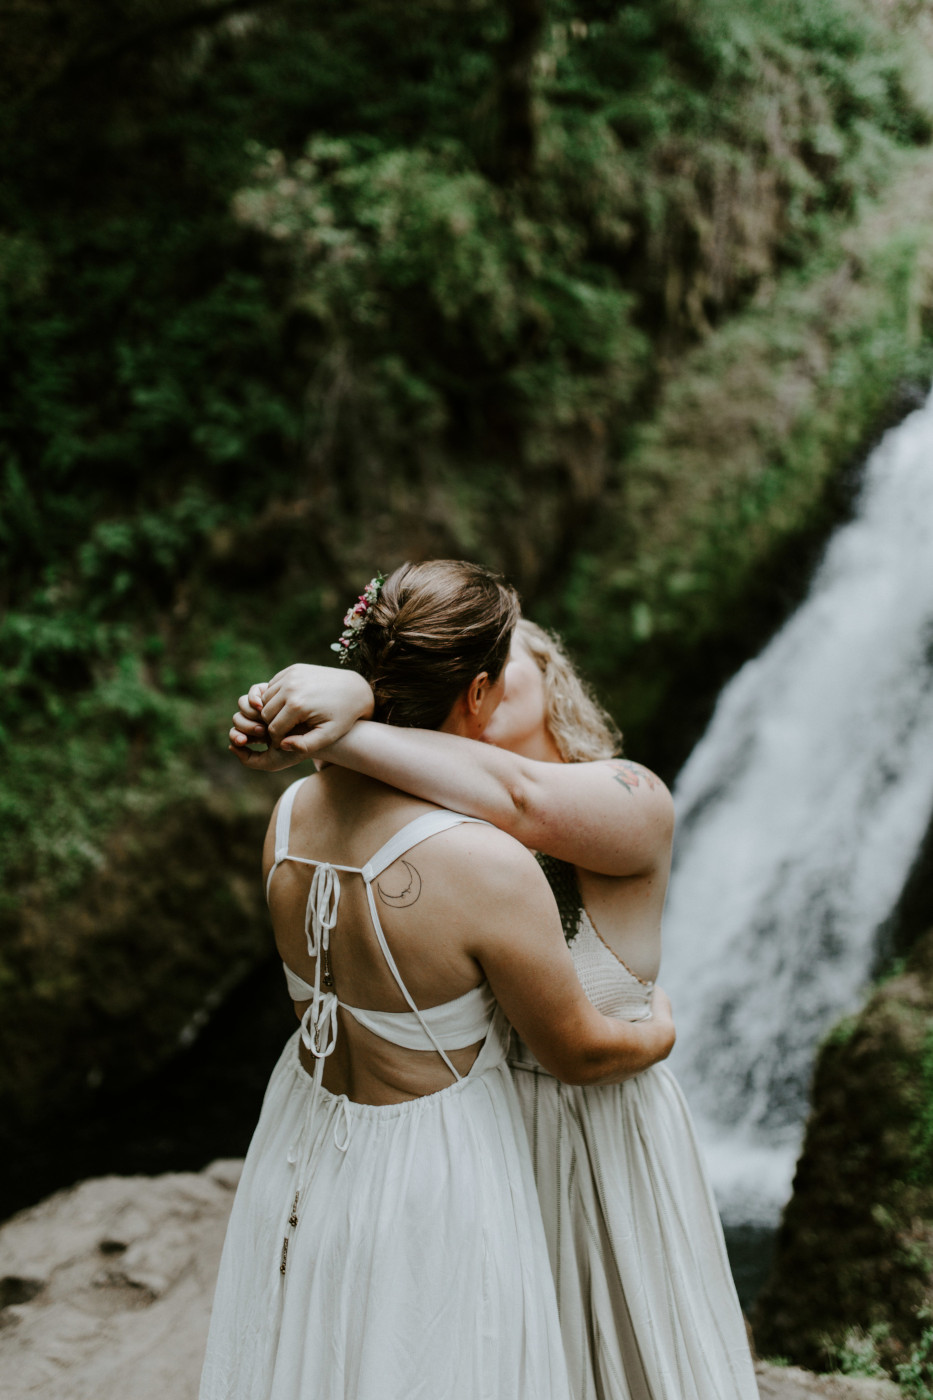 Kate and Audrey kiss in front of Bridal Veil Falls. Elopement wedding photography at Bridal Veil Falls by Sienna Plus Josh.